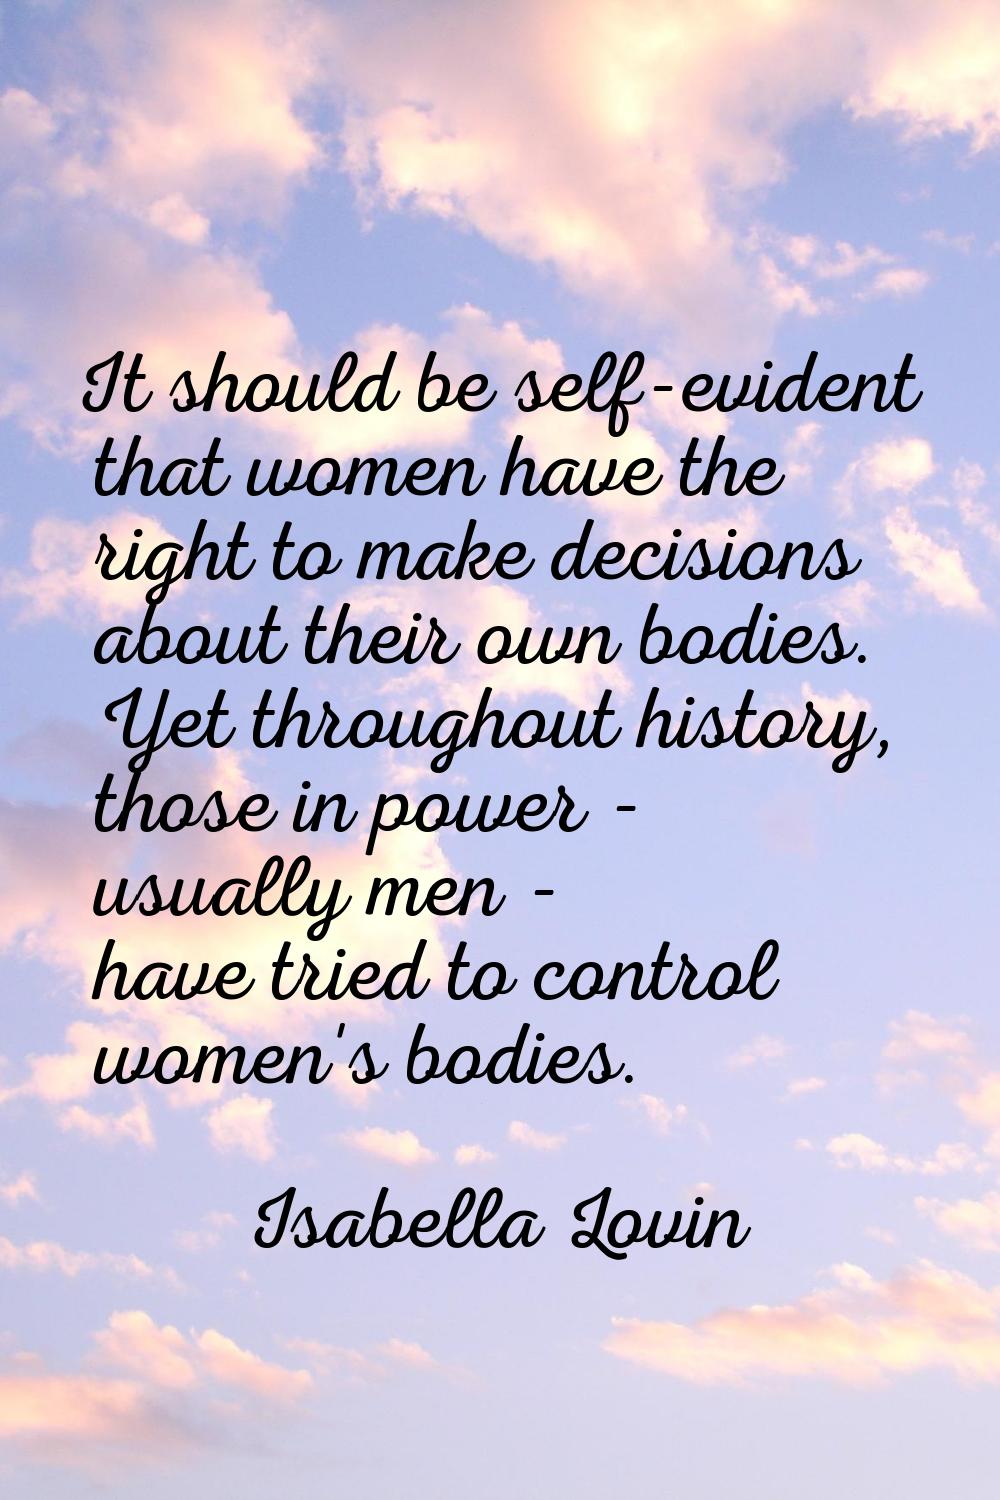 It should be self-evident that women have the right to make decisions about their own bodies. Yet t